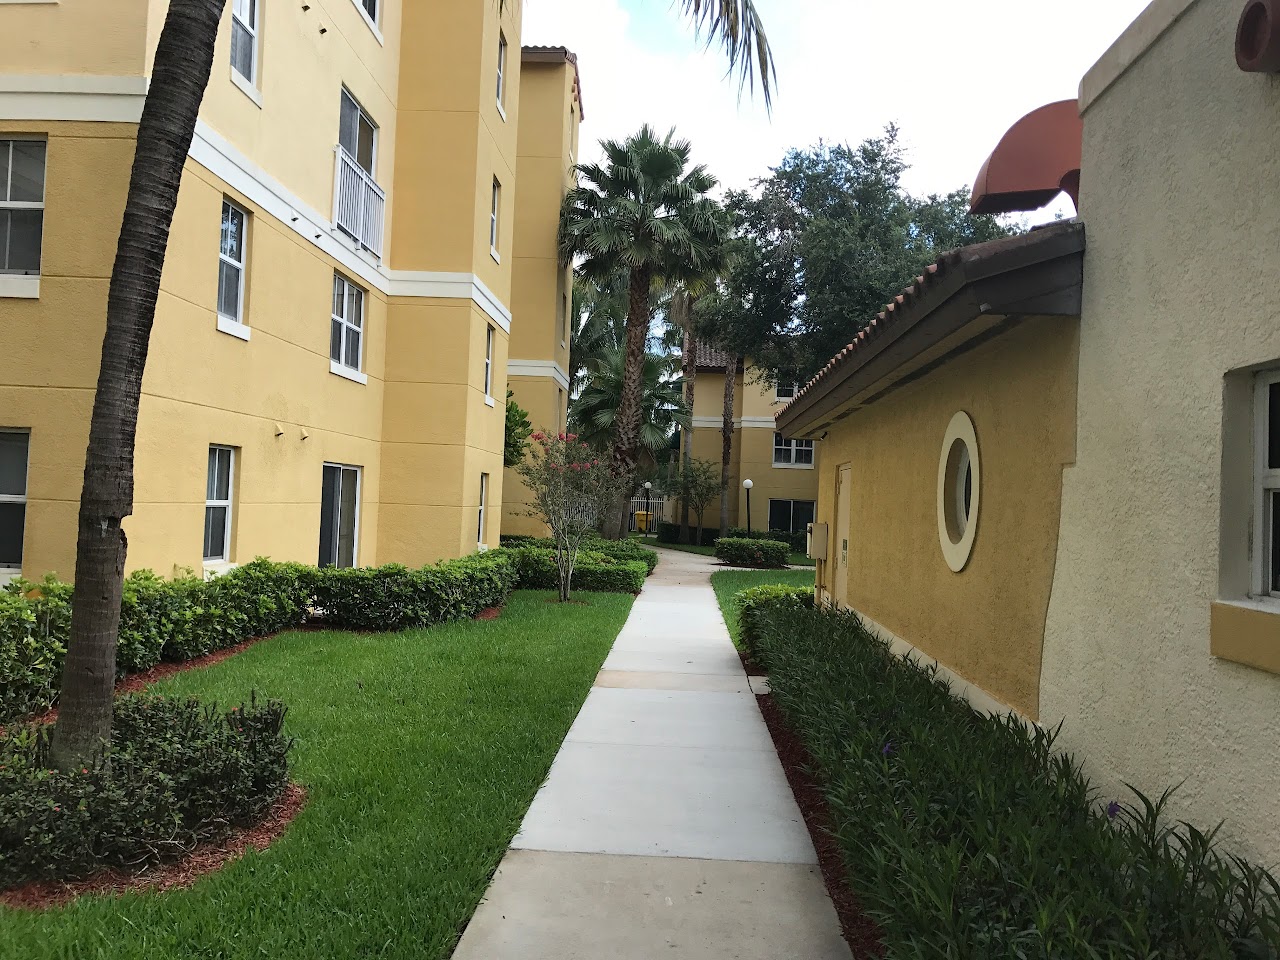 Photo of PINNACLE PALMS. Affordable housing located at 601 EXECUTIVE CTR DR WEST PALM BEACH, FL 33401